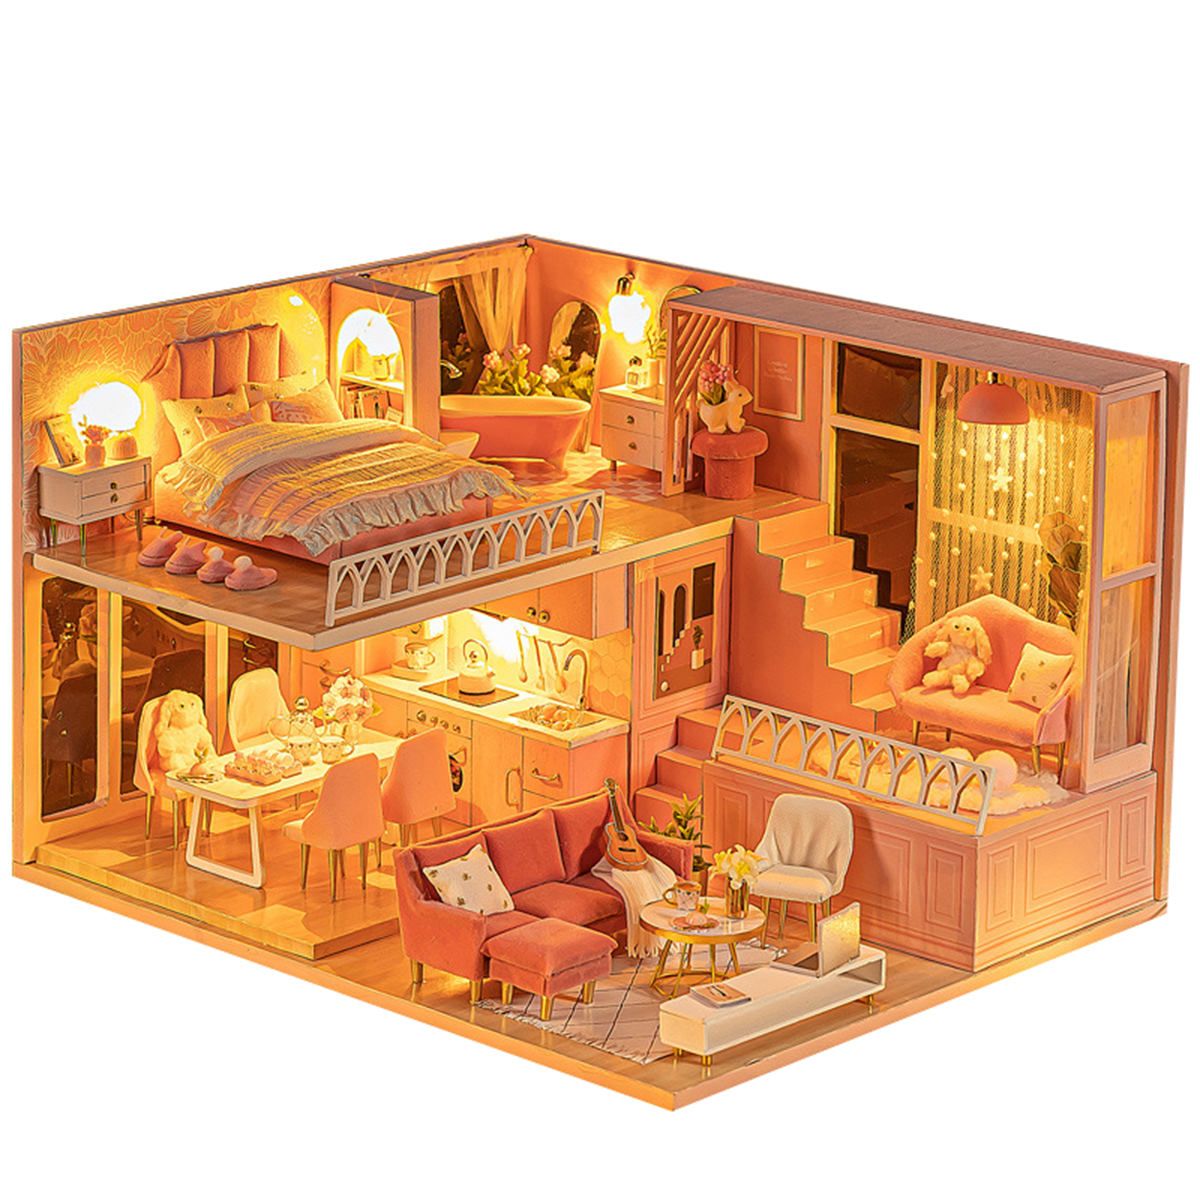 124-Wooden-3D-DIY-Handmade-Assemble-Miniature-Doll-House-Kit-Toy-with-Furniture-for-Kids-Gift-Collec-1730578-3